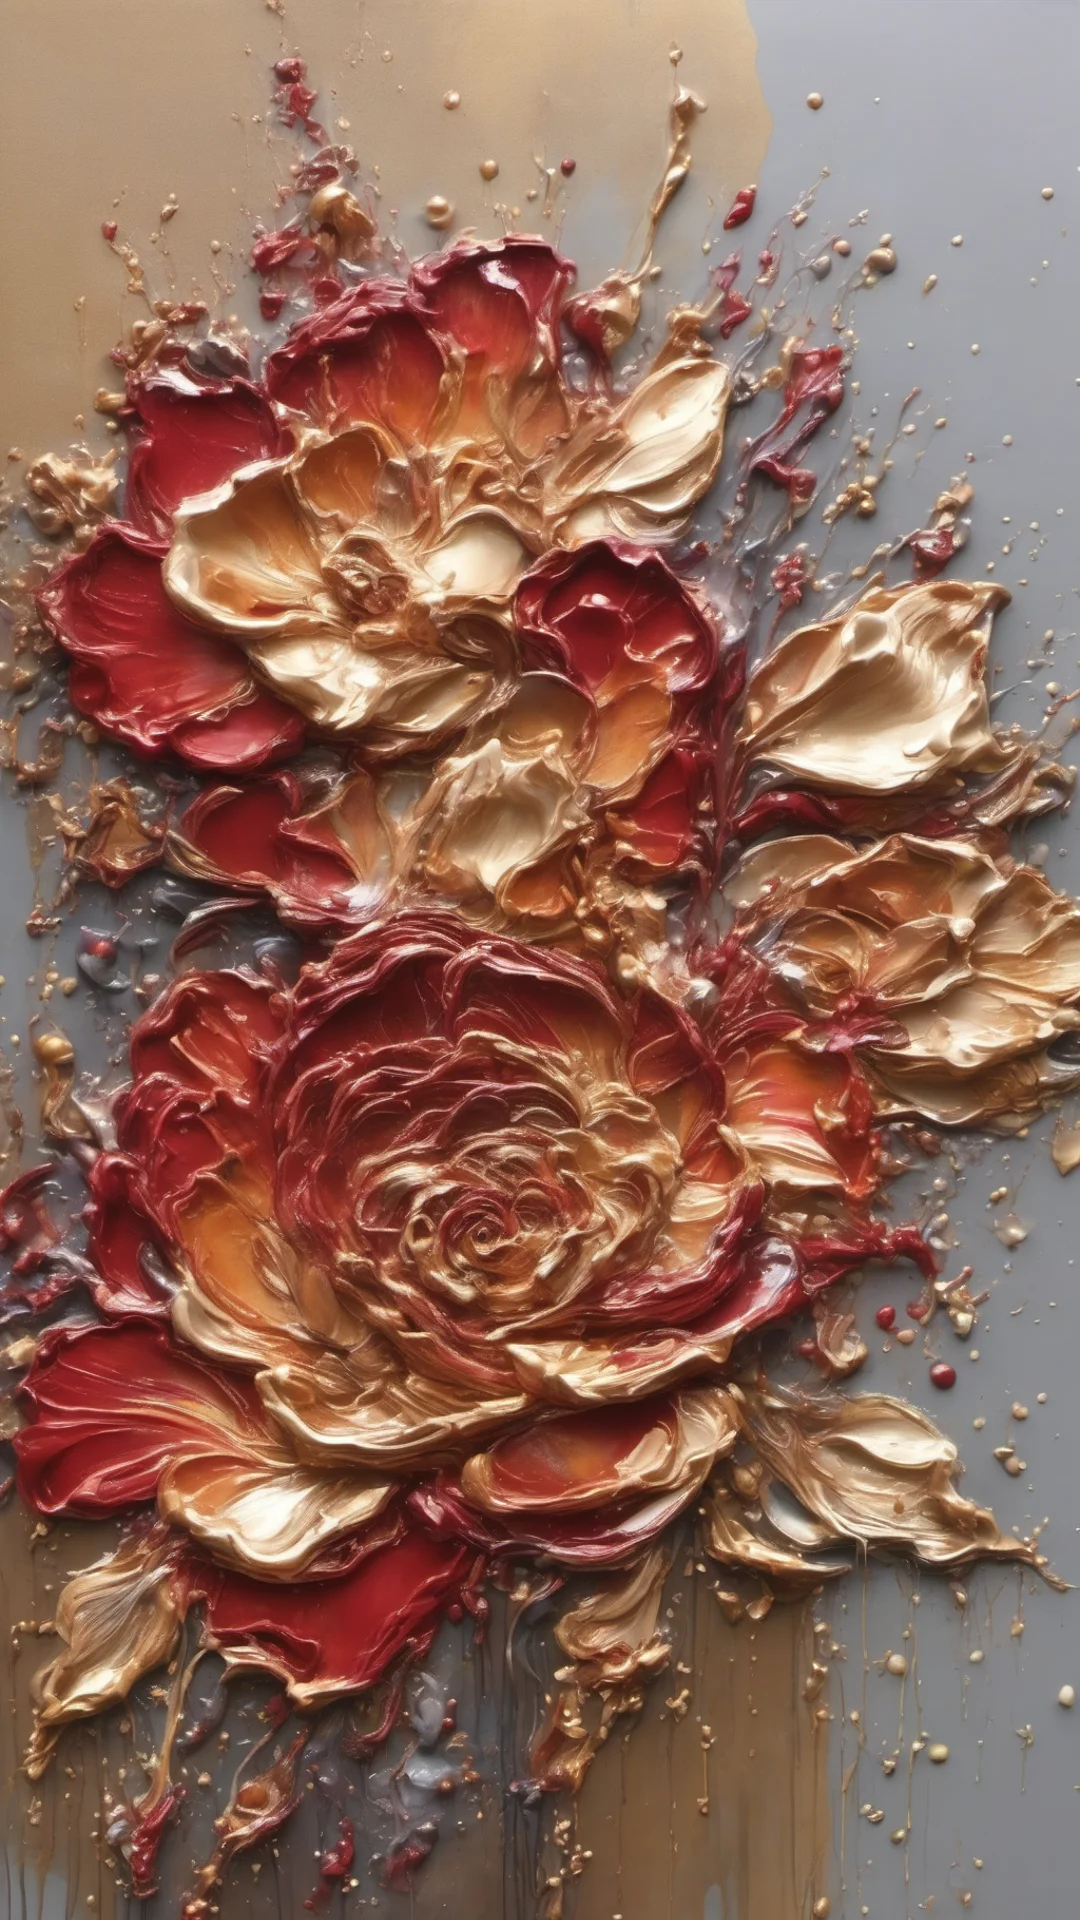 blossoming redgold colorful rose diamond flowers  %3A use fluid pouring to create a floral masterpiece%2C with paint pouring techniques mimicking the delicate petals of blooming flowers%2C brushstro